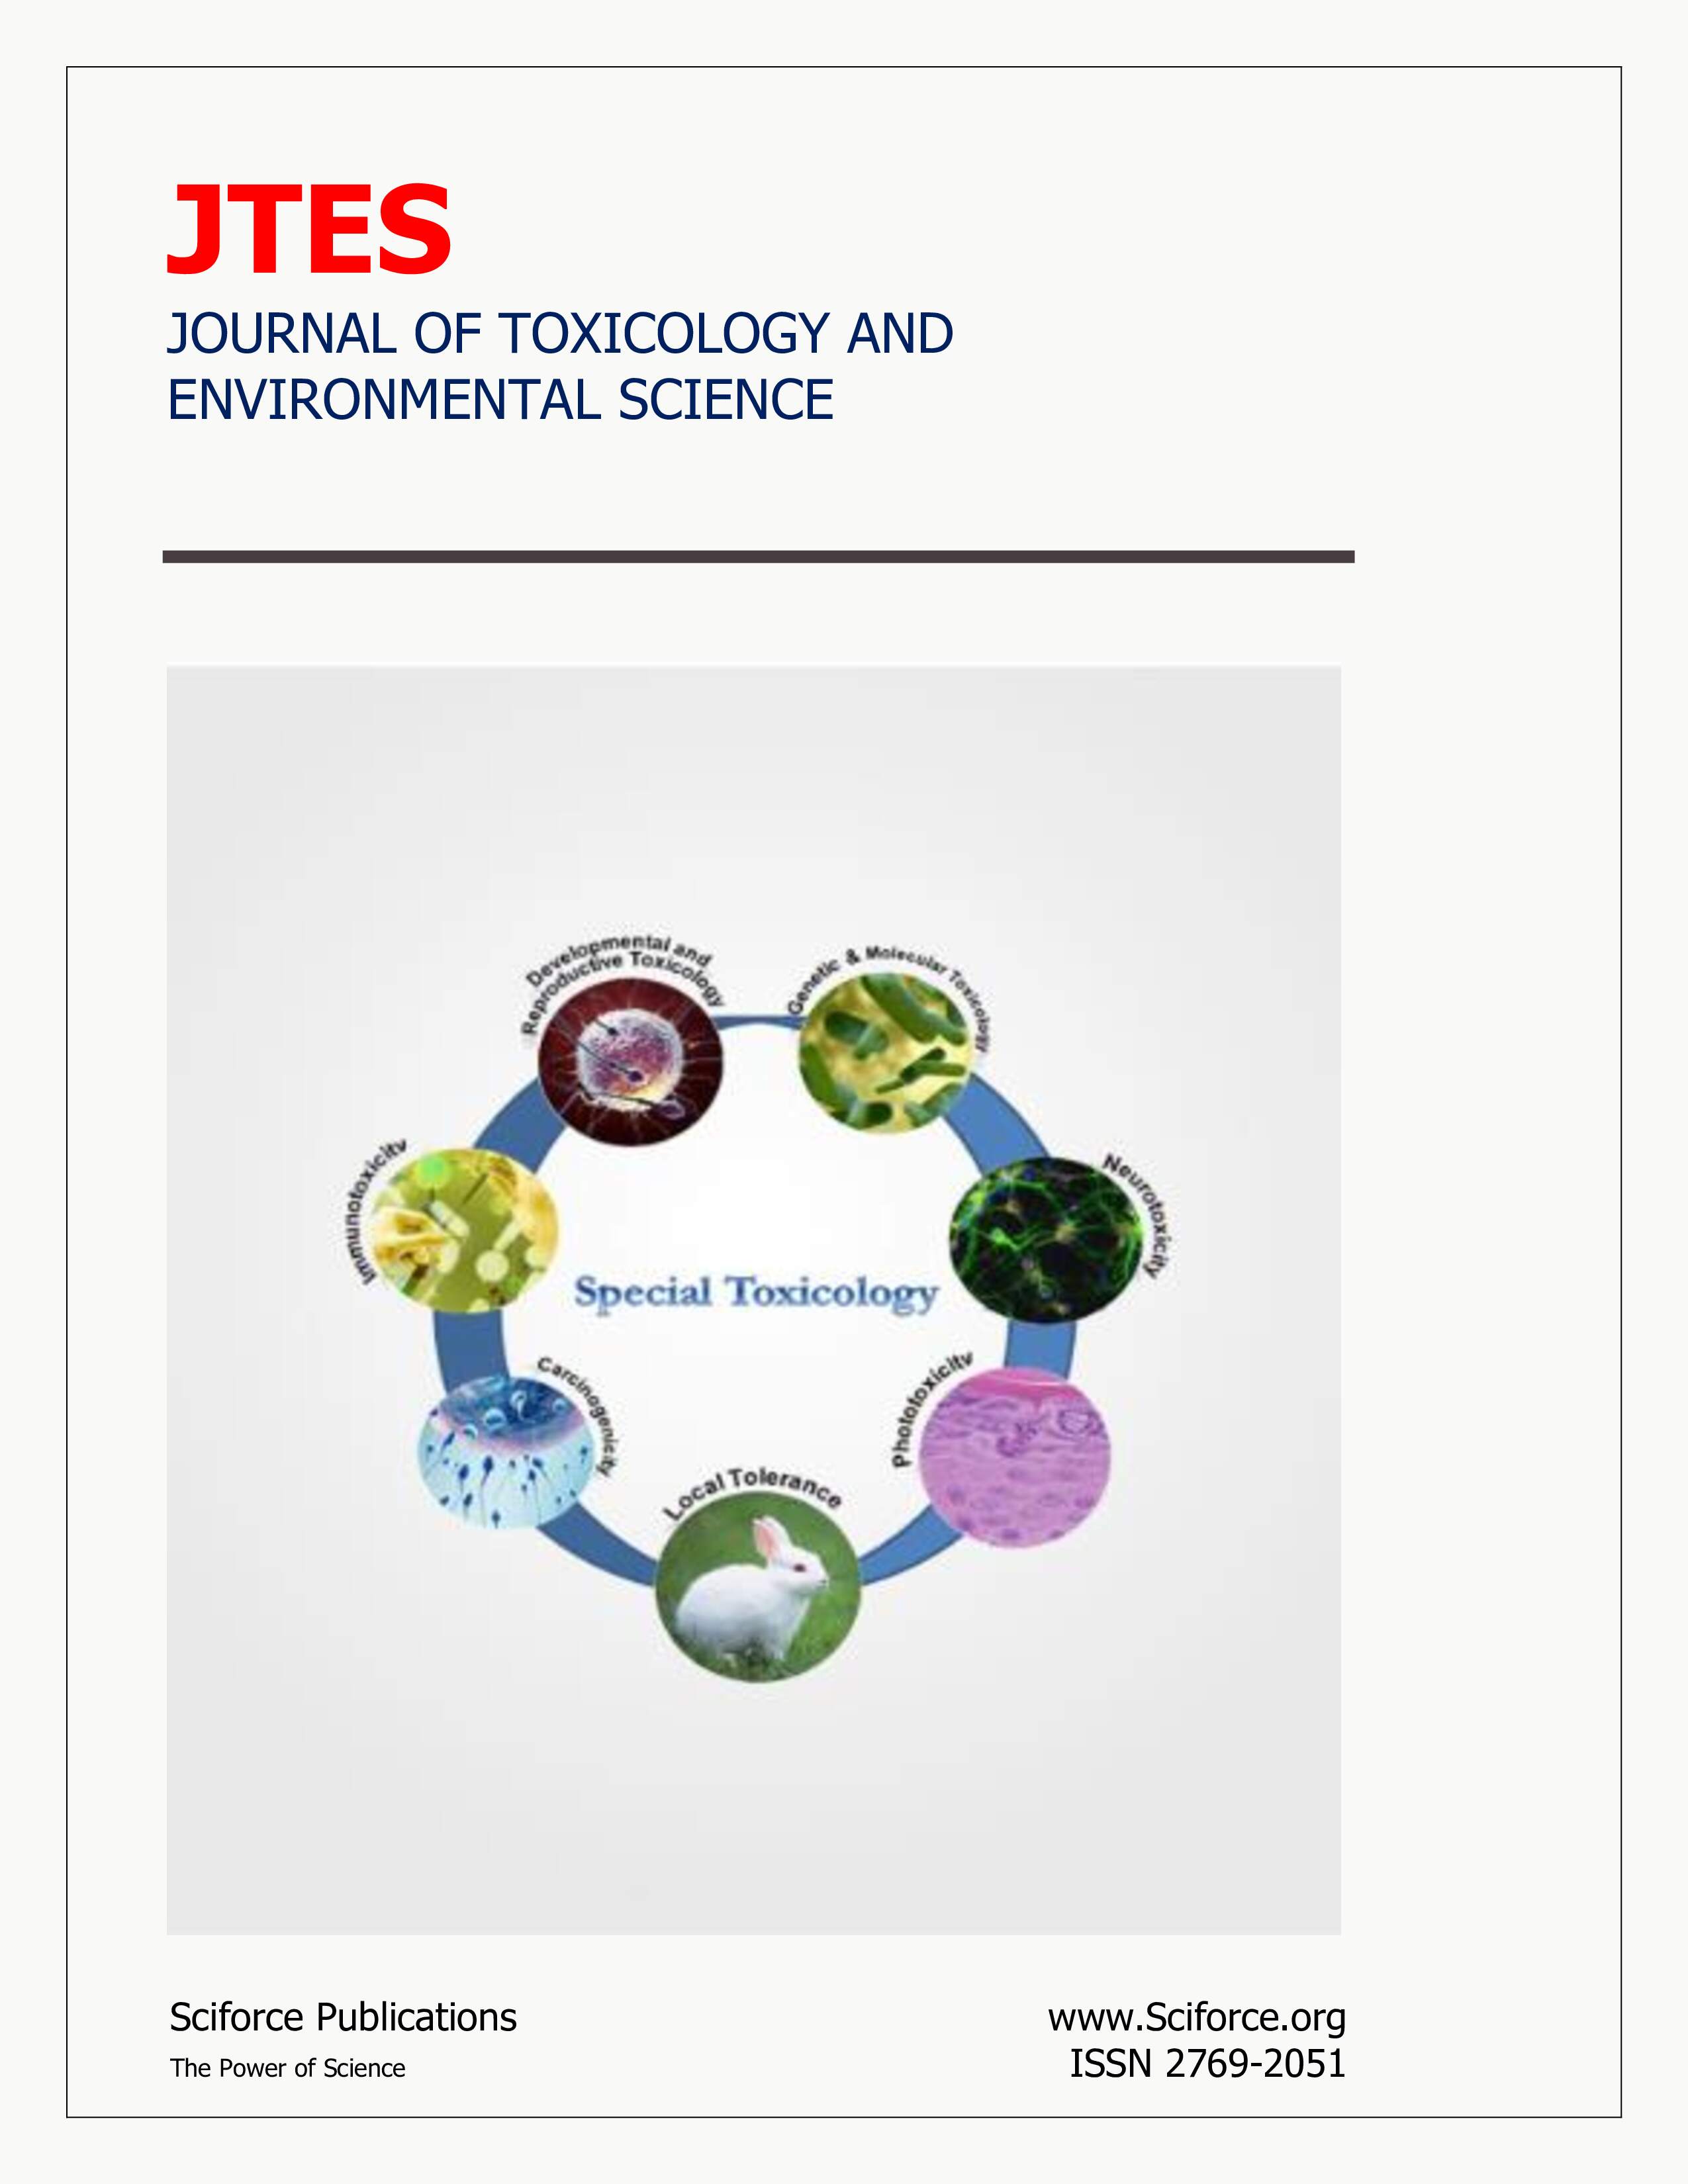 Journal of Toxicology of Environmental Sciences